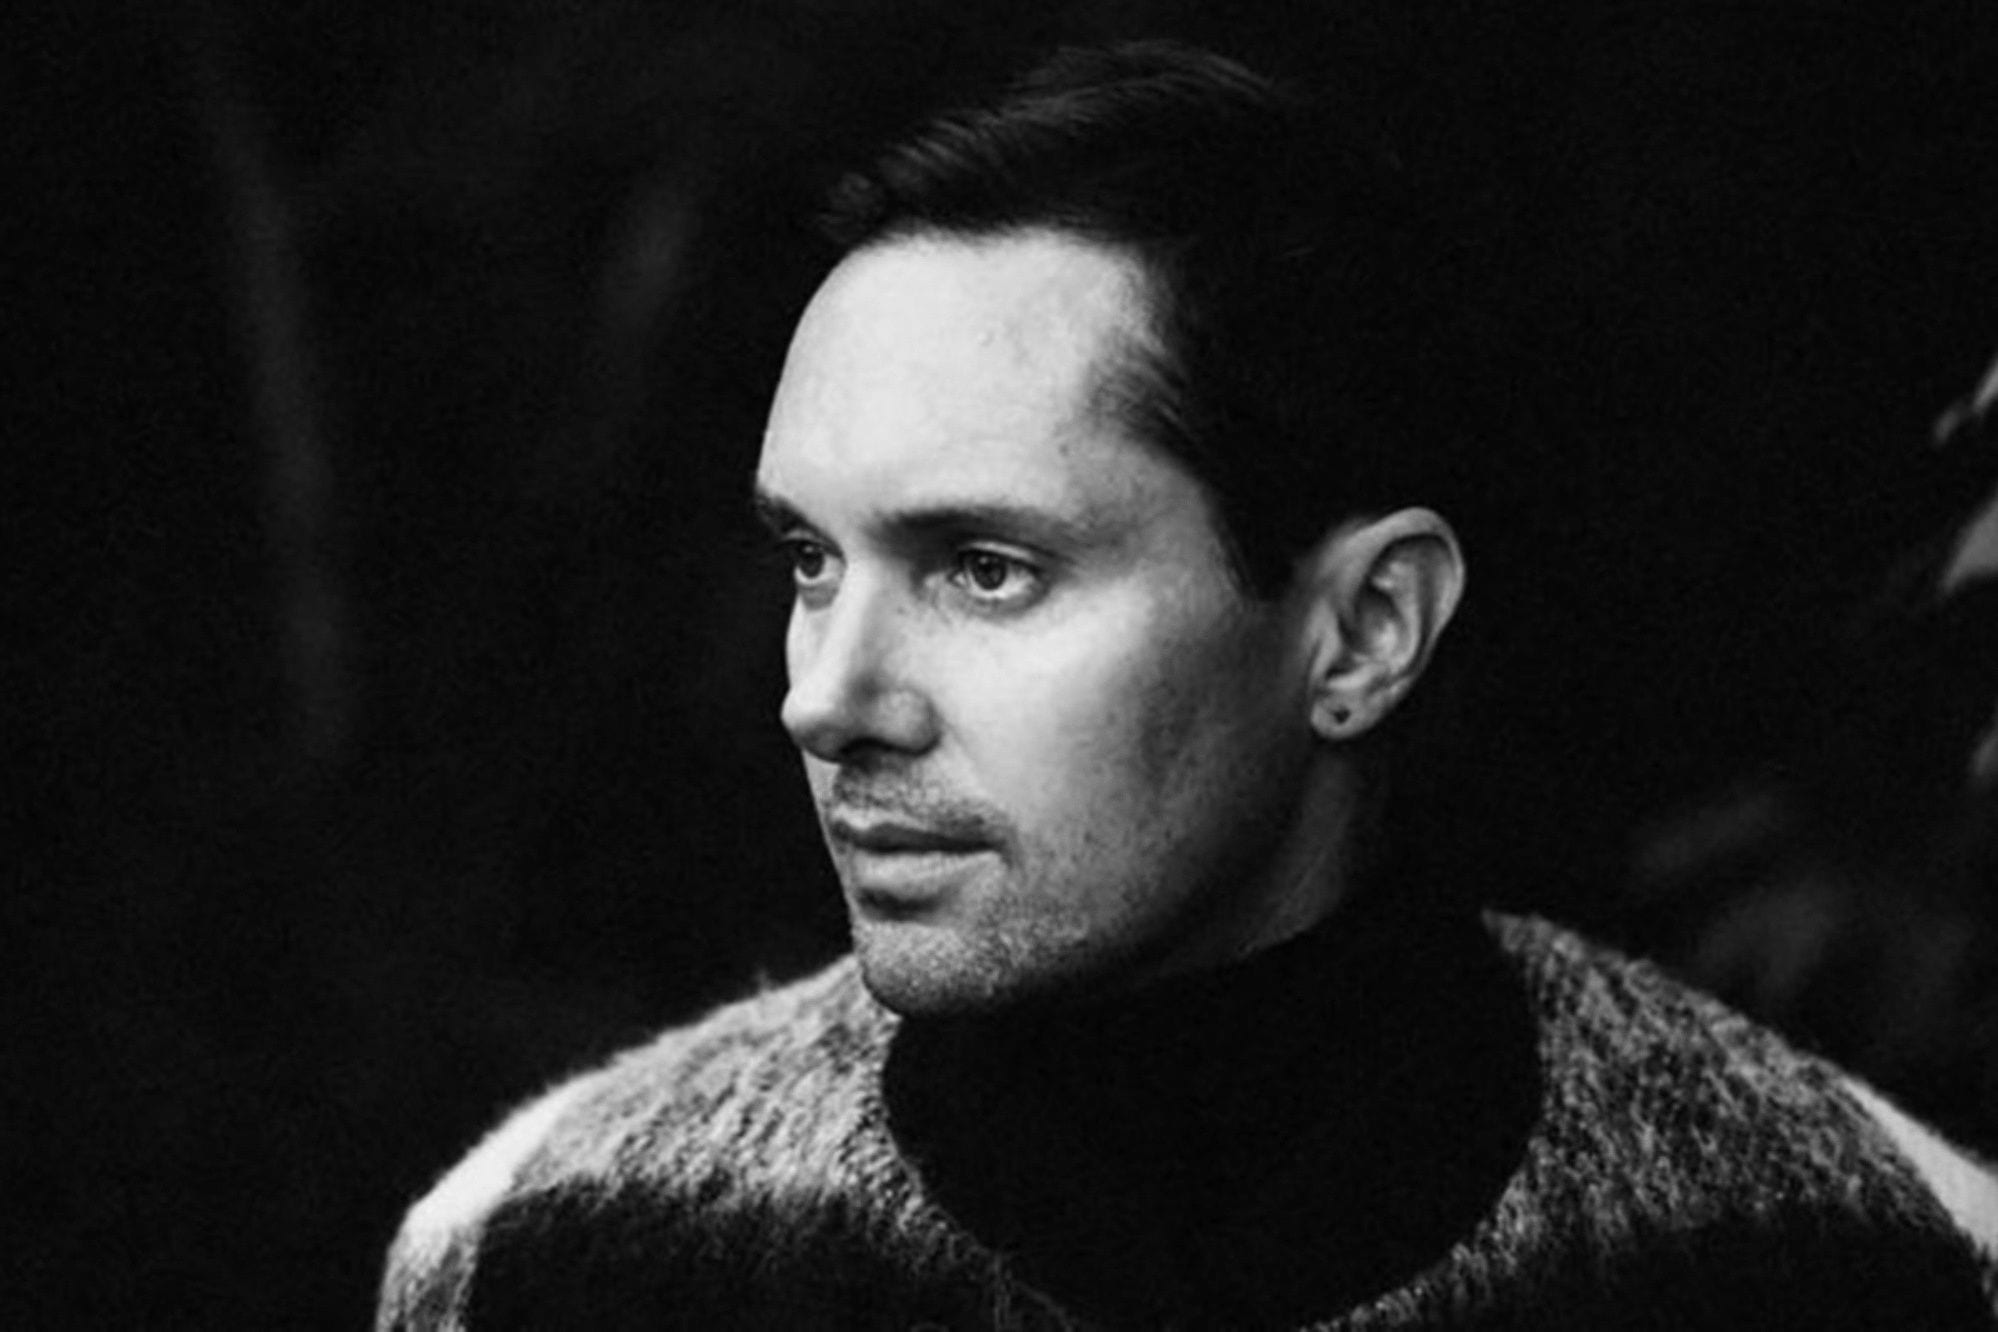 Rhye – “Count to Five” (Singles Going Steady)